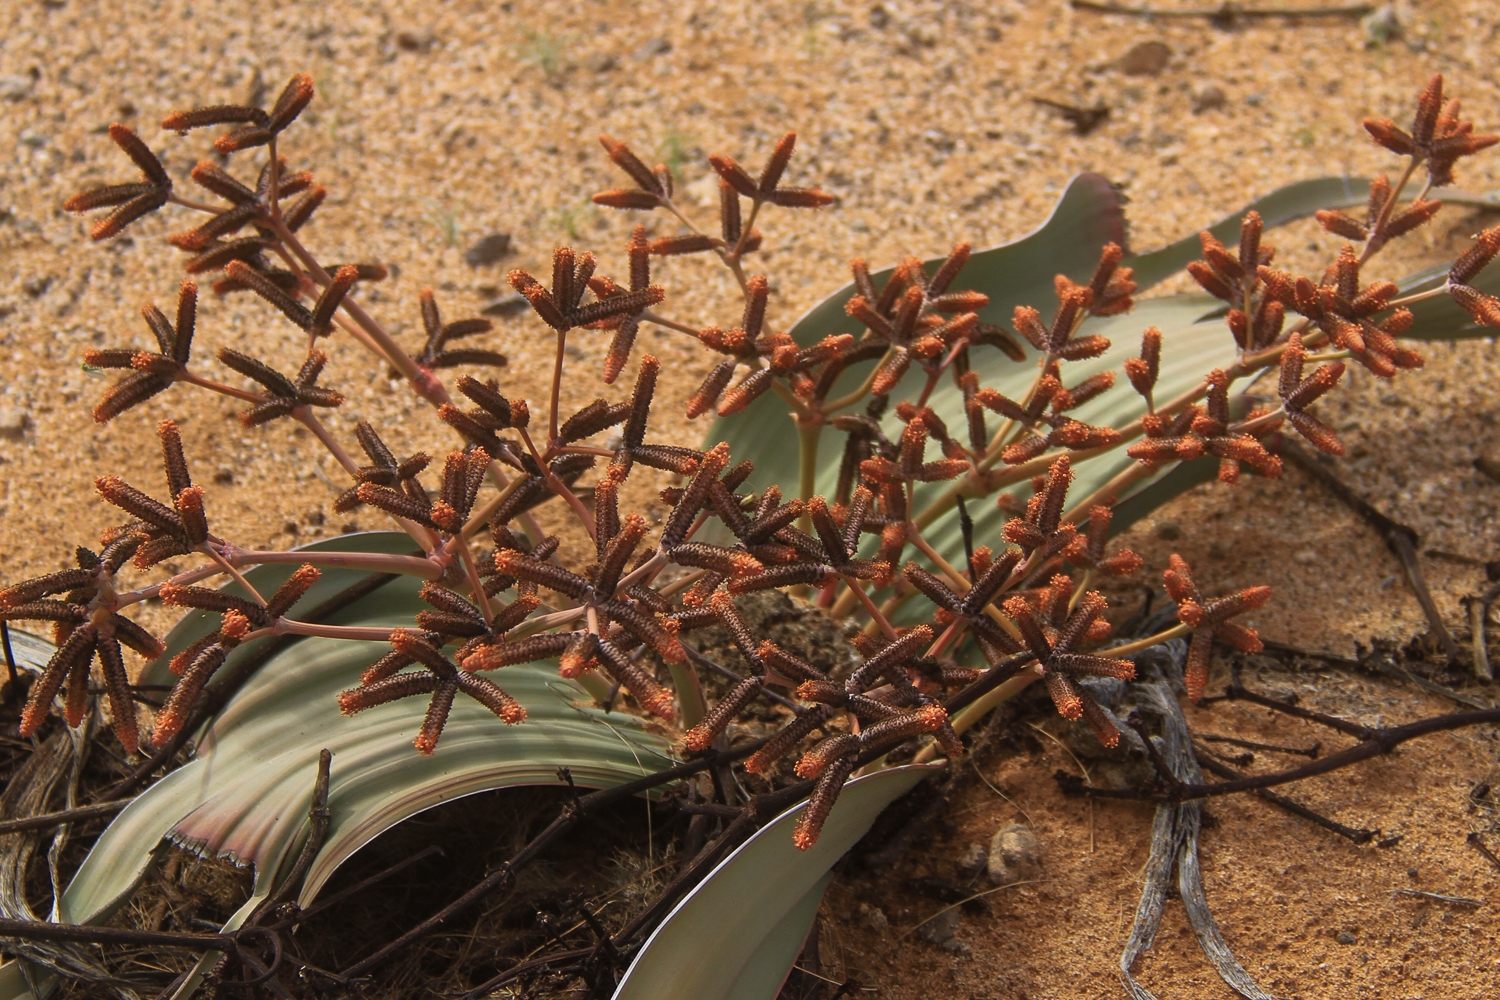 Messum-Crater-Namibia-endemic-plant-Welwitschia-pollen